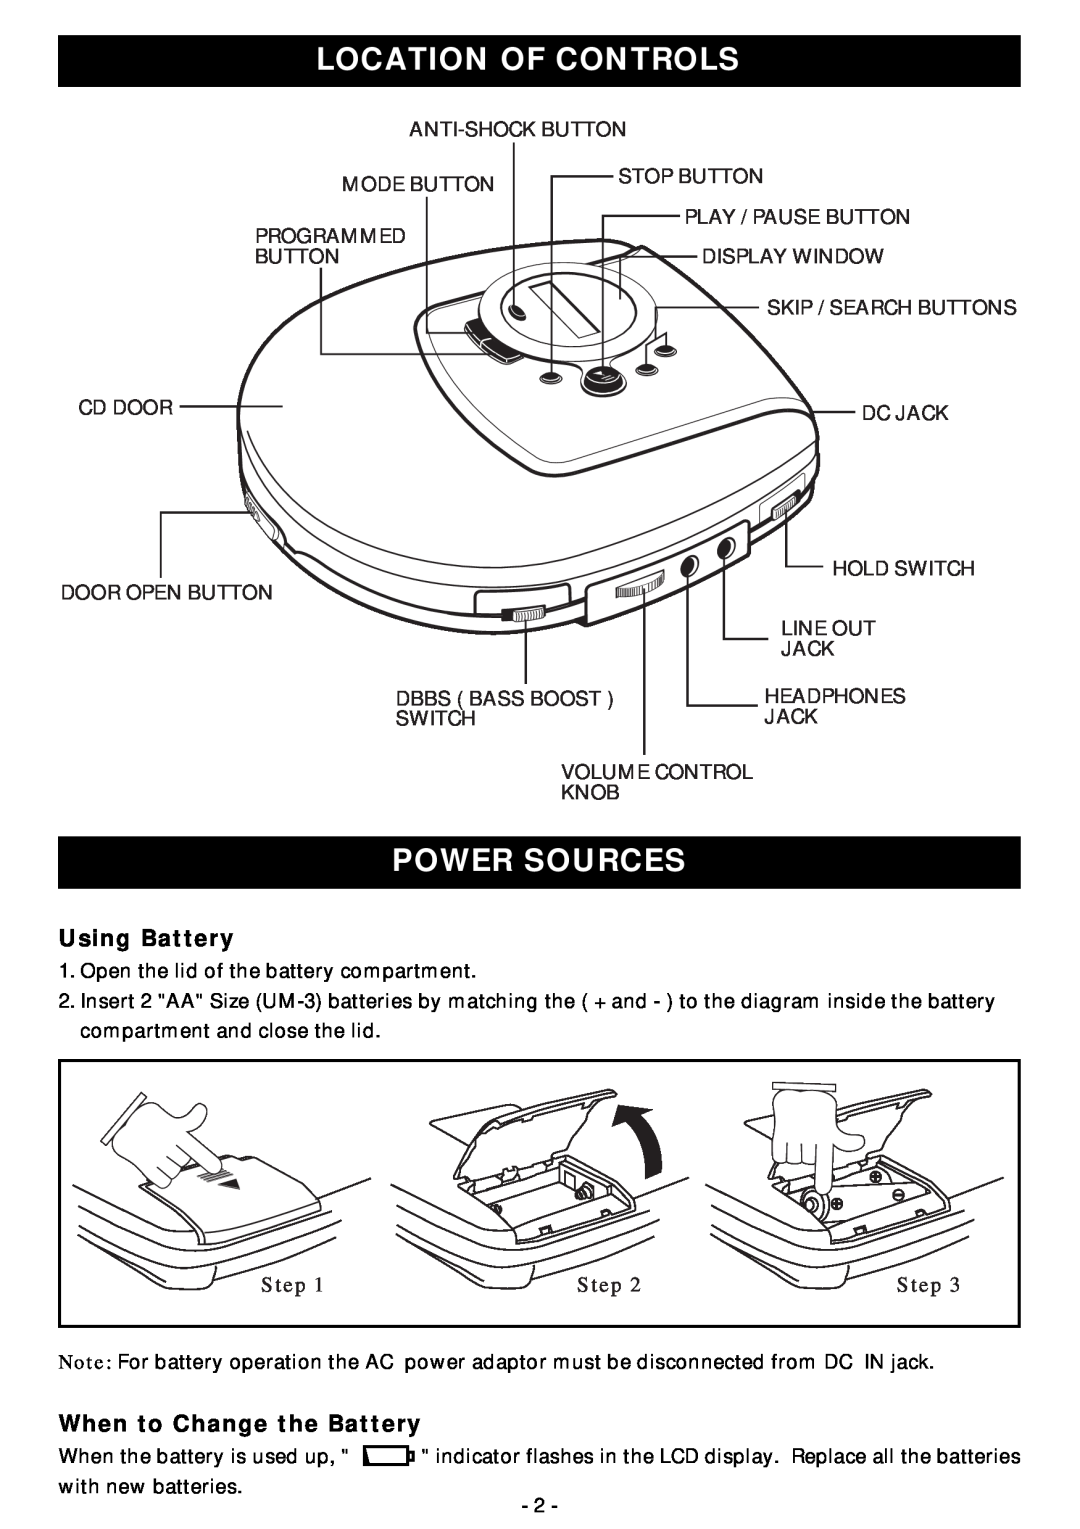 Memorex MD6440cp manual Location Of Controlss, Power Sources, Using Battery, When to Change the Battery, Step 